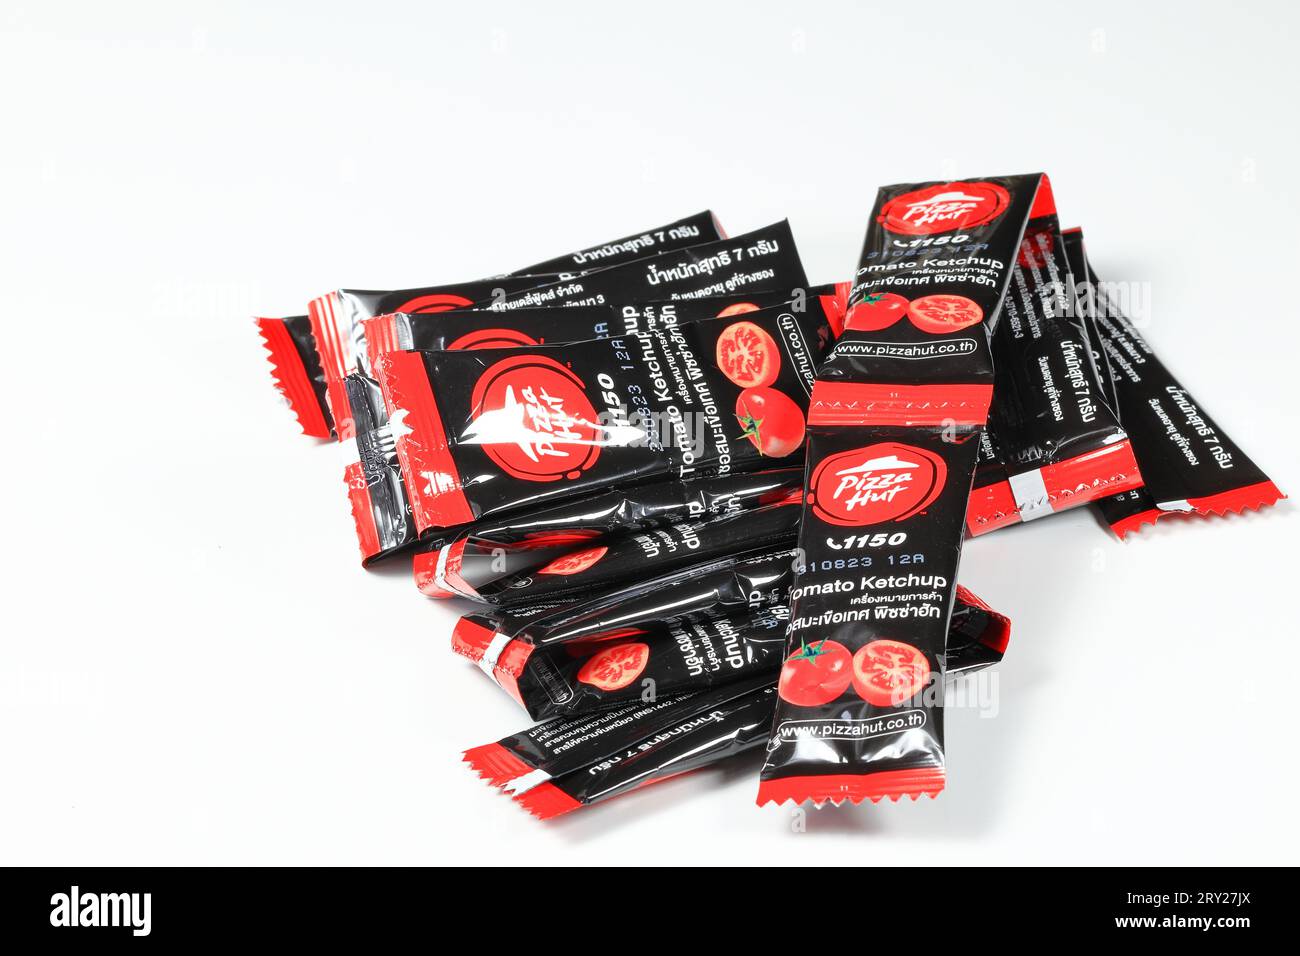 Pile of seasoning packets or sachet Of Pizza Hut, an American restaurant chain. ketchup or tomato sauce with small black packaging or sachet packet. Stock Photo